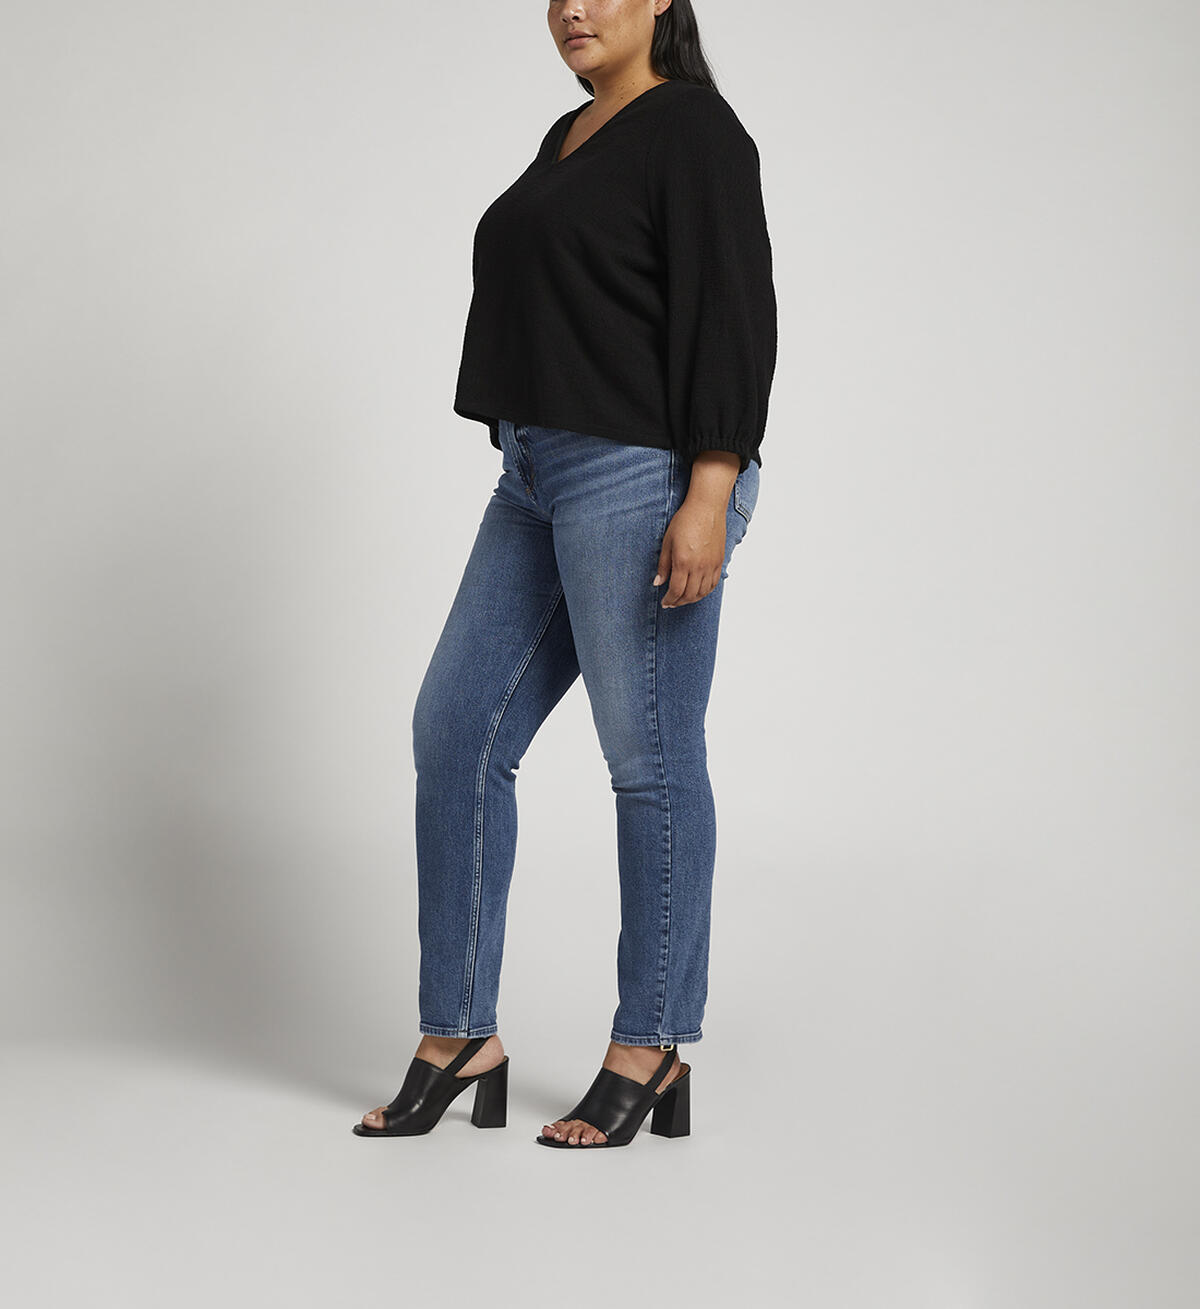 Most Wanted Mid Rise Straight Leg Jeans Plus Size, , hi-res image number 2